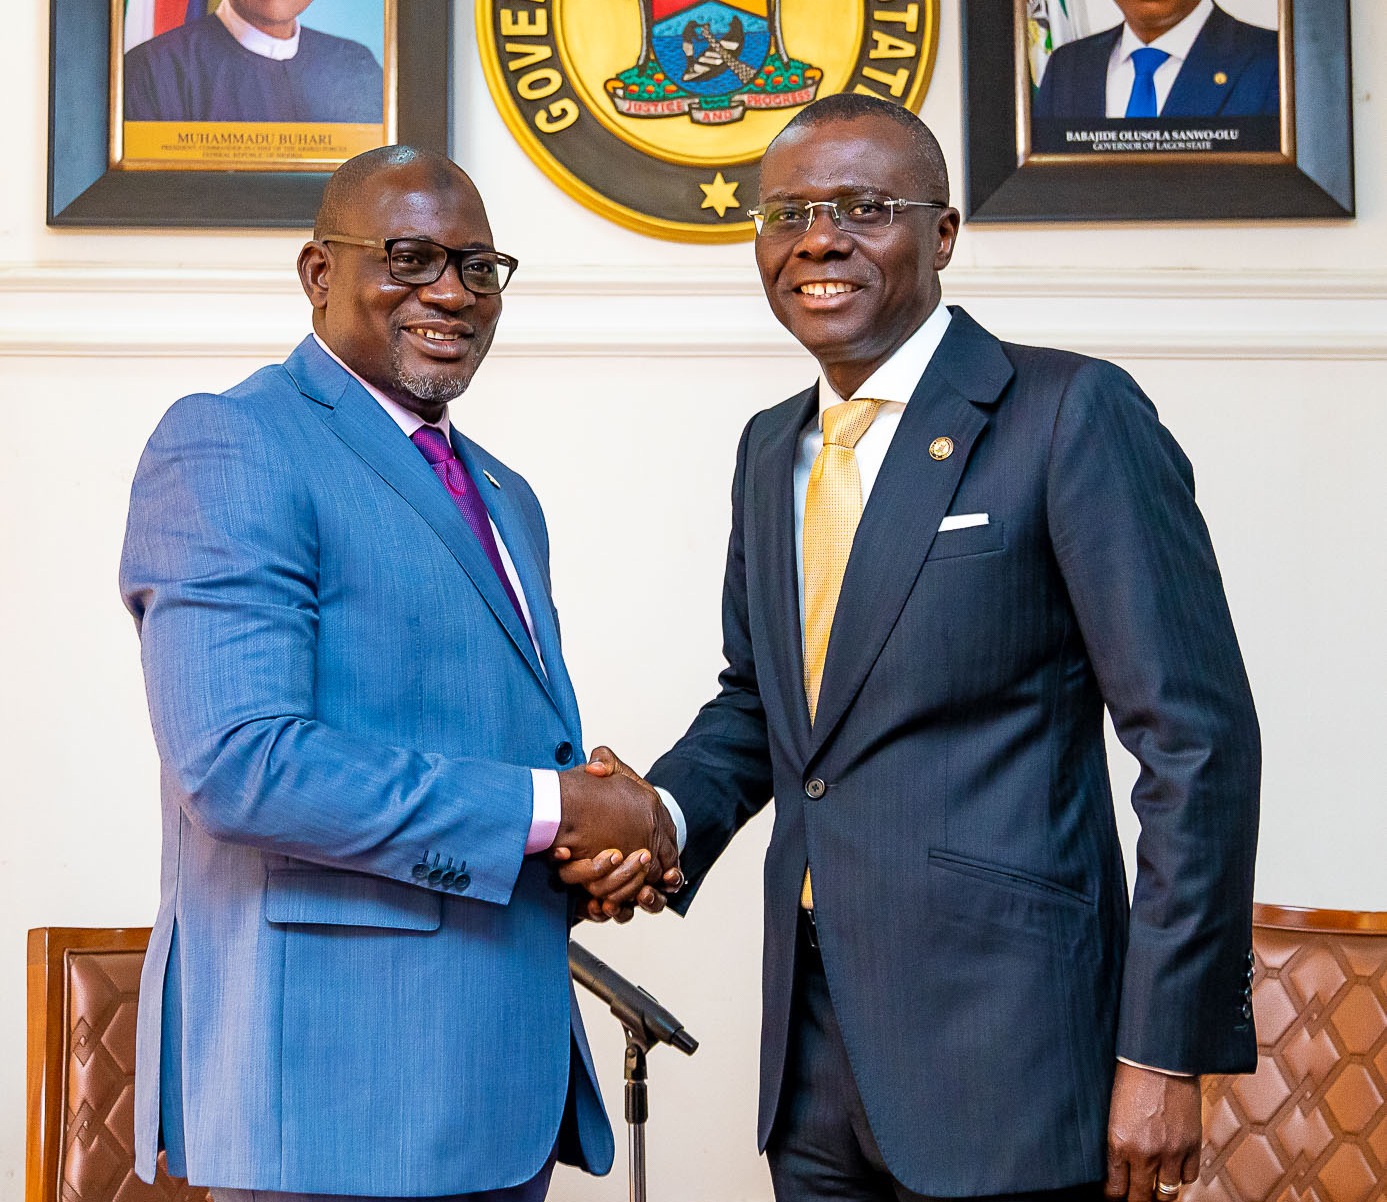 L-R: Chairman, Federal Inland Revenue Service (FIRS), Mr. Muhammad Mamman Nami, with Lagos State Governor, Mr. Babajide Sanwo-Olu during a courtesy visit to the Governor at Lagos House, Alausa, Ikeja, on Tuesday, February 18, 2020.